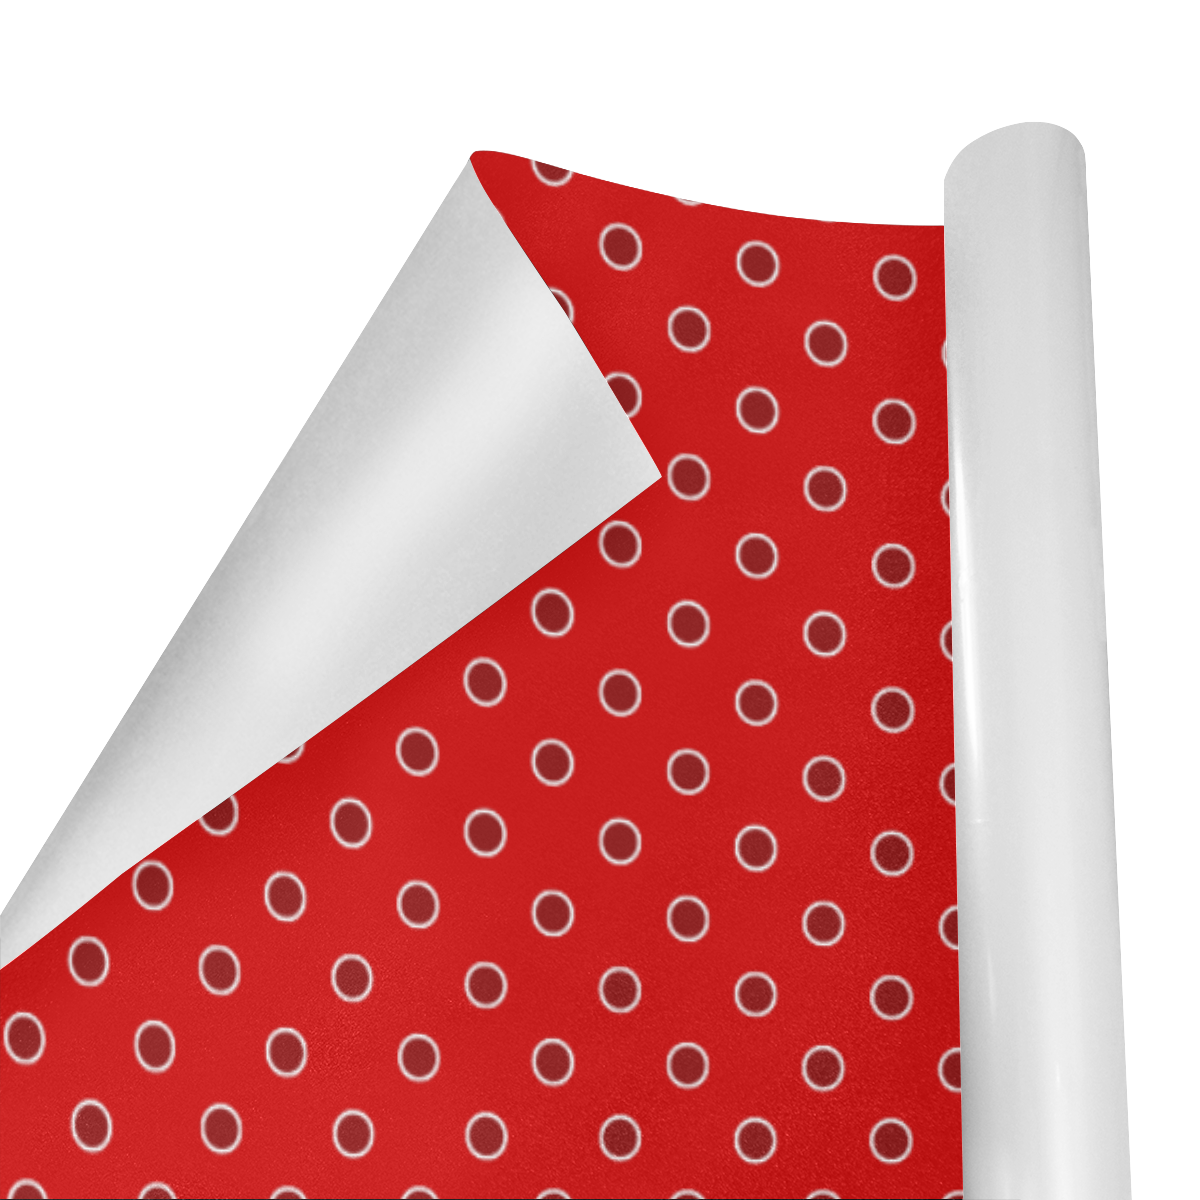 Red Polka Dots on Red Gift Wrapping Paper 58"x 23" (5 Rolls)